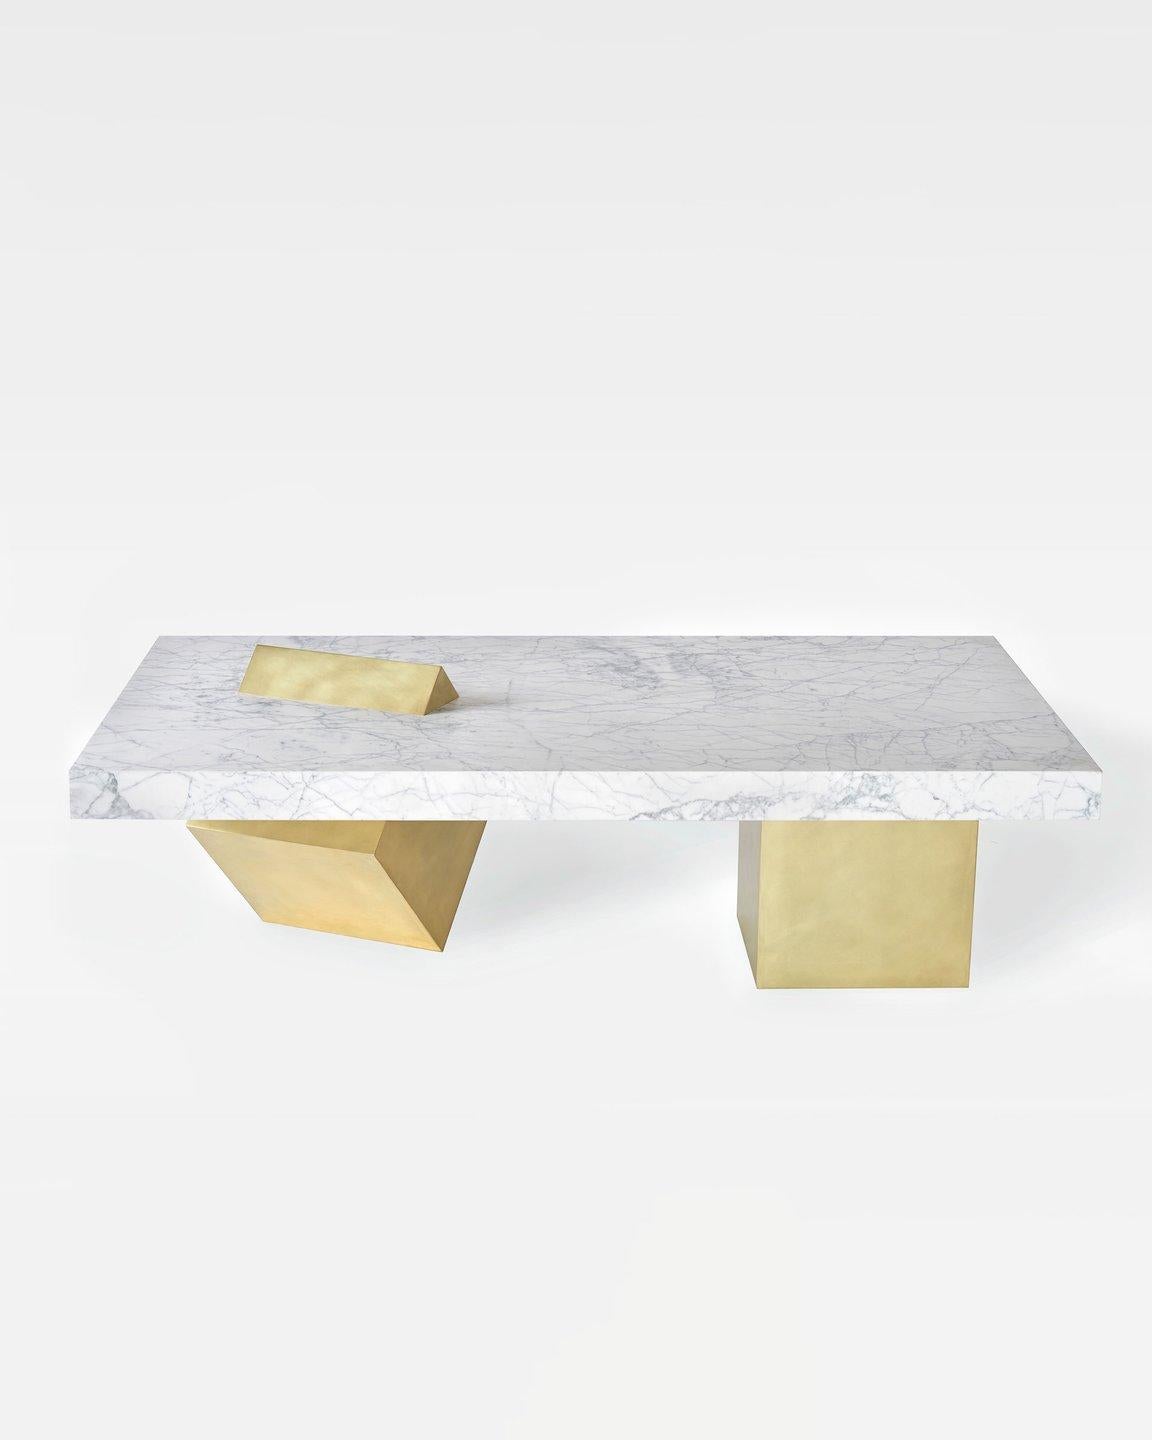 The coexist coffee consists of white venato marble tabletop and brushed brass cube base. 

A brass cube leg stands on its knife-edge and seamlessly slices through the table’s thick marble top, relying on the stone’s weight to maintain balance. A